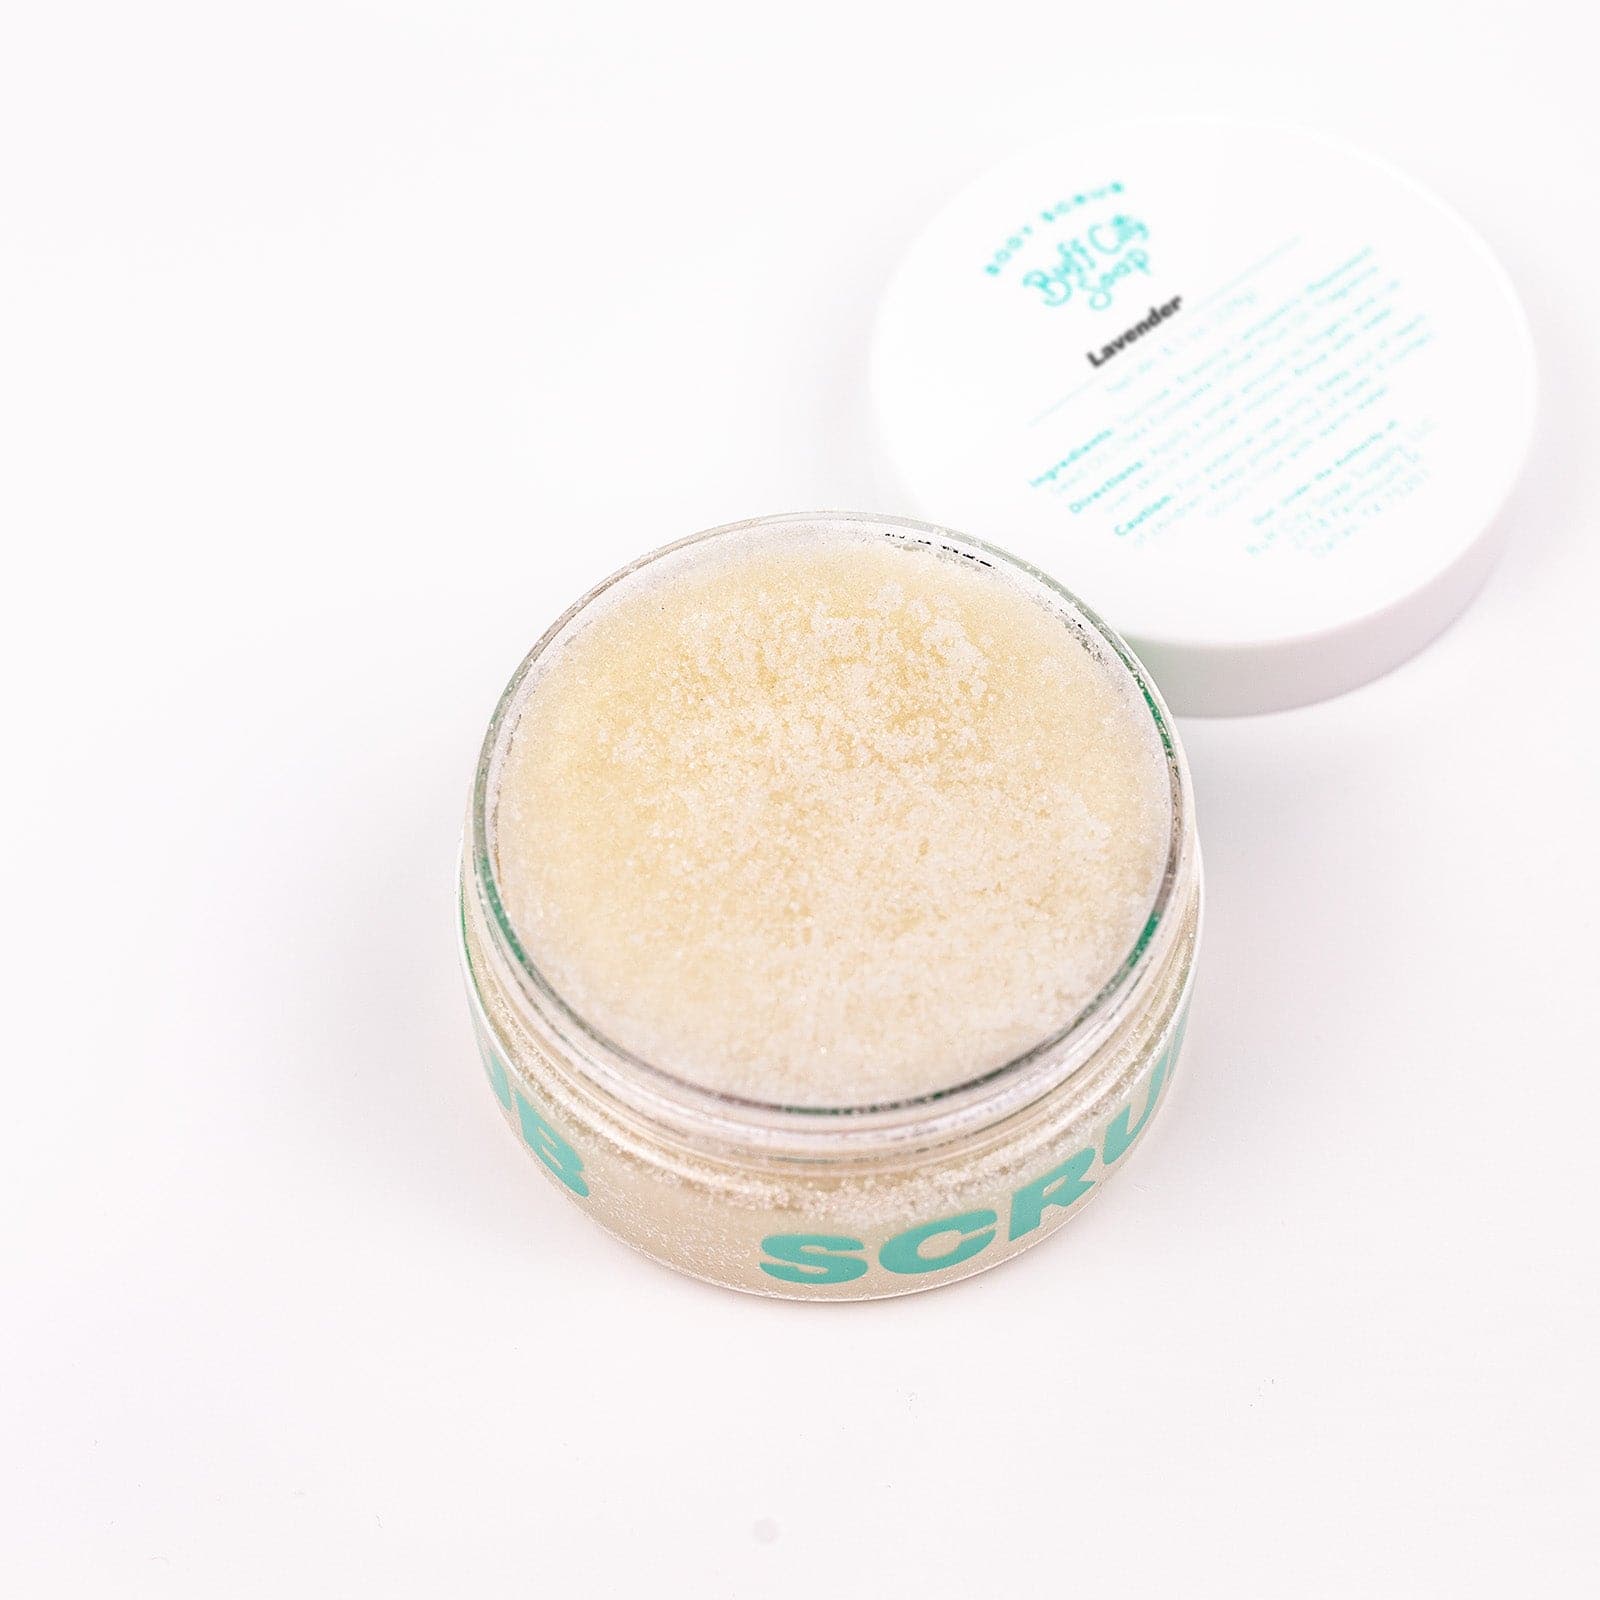 open Buff City Soap's lavender body scrub container with the white colored lid next to it